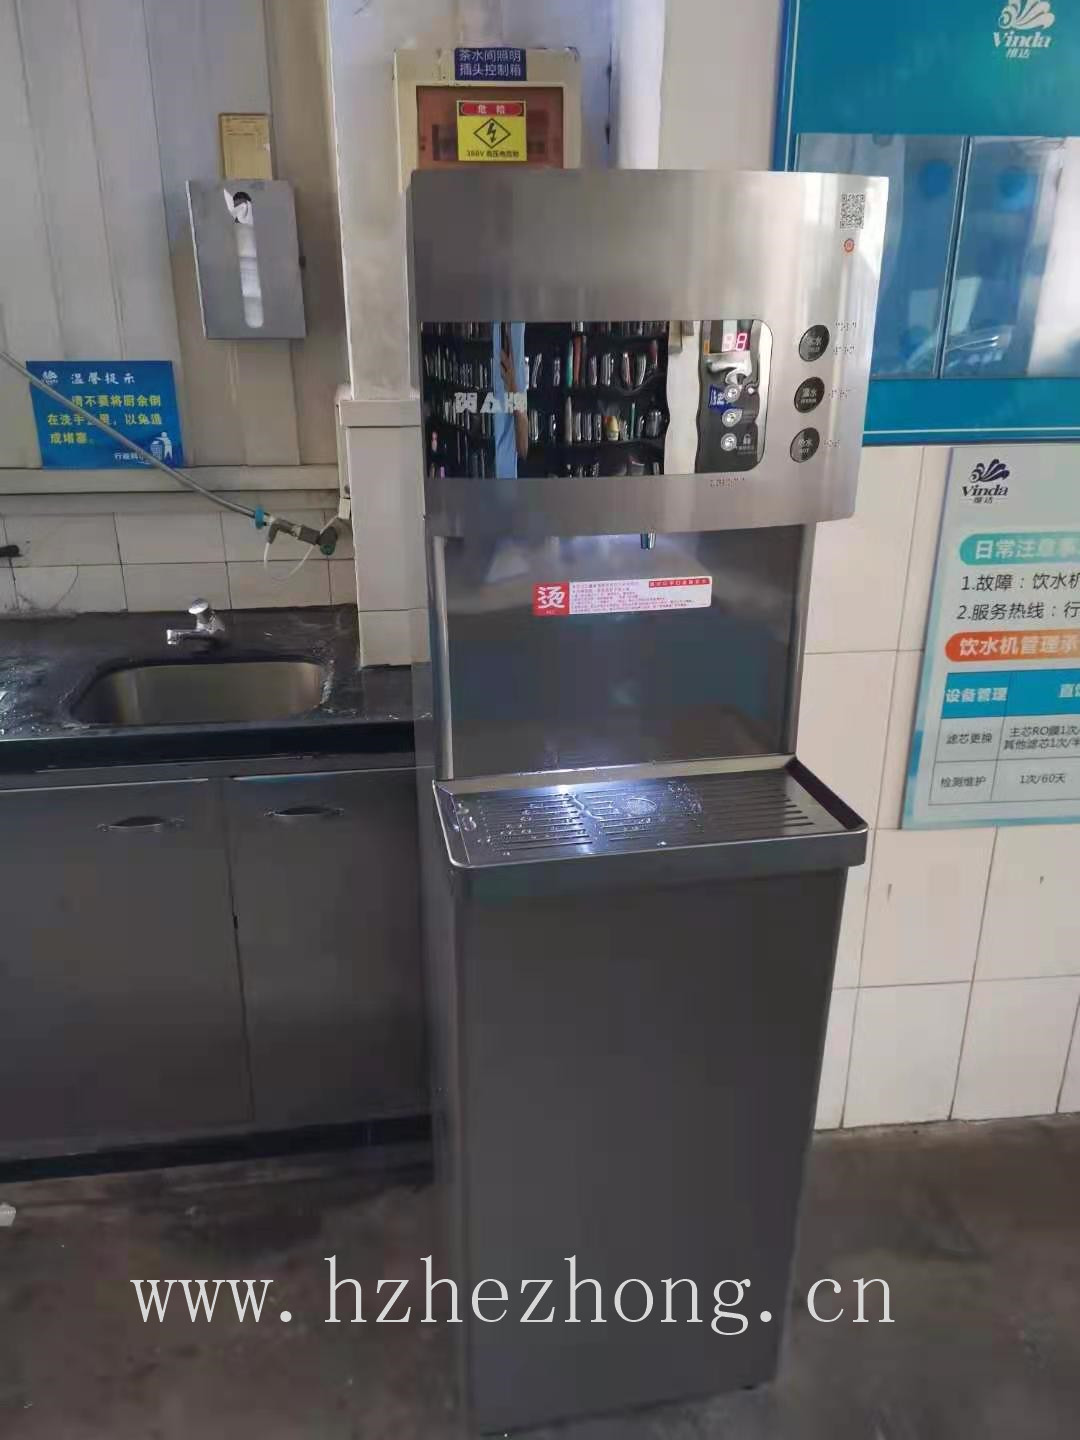 Weida Paper (China) Co., LTD uses ACUO brand water dispenser